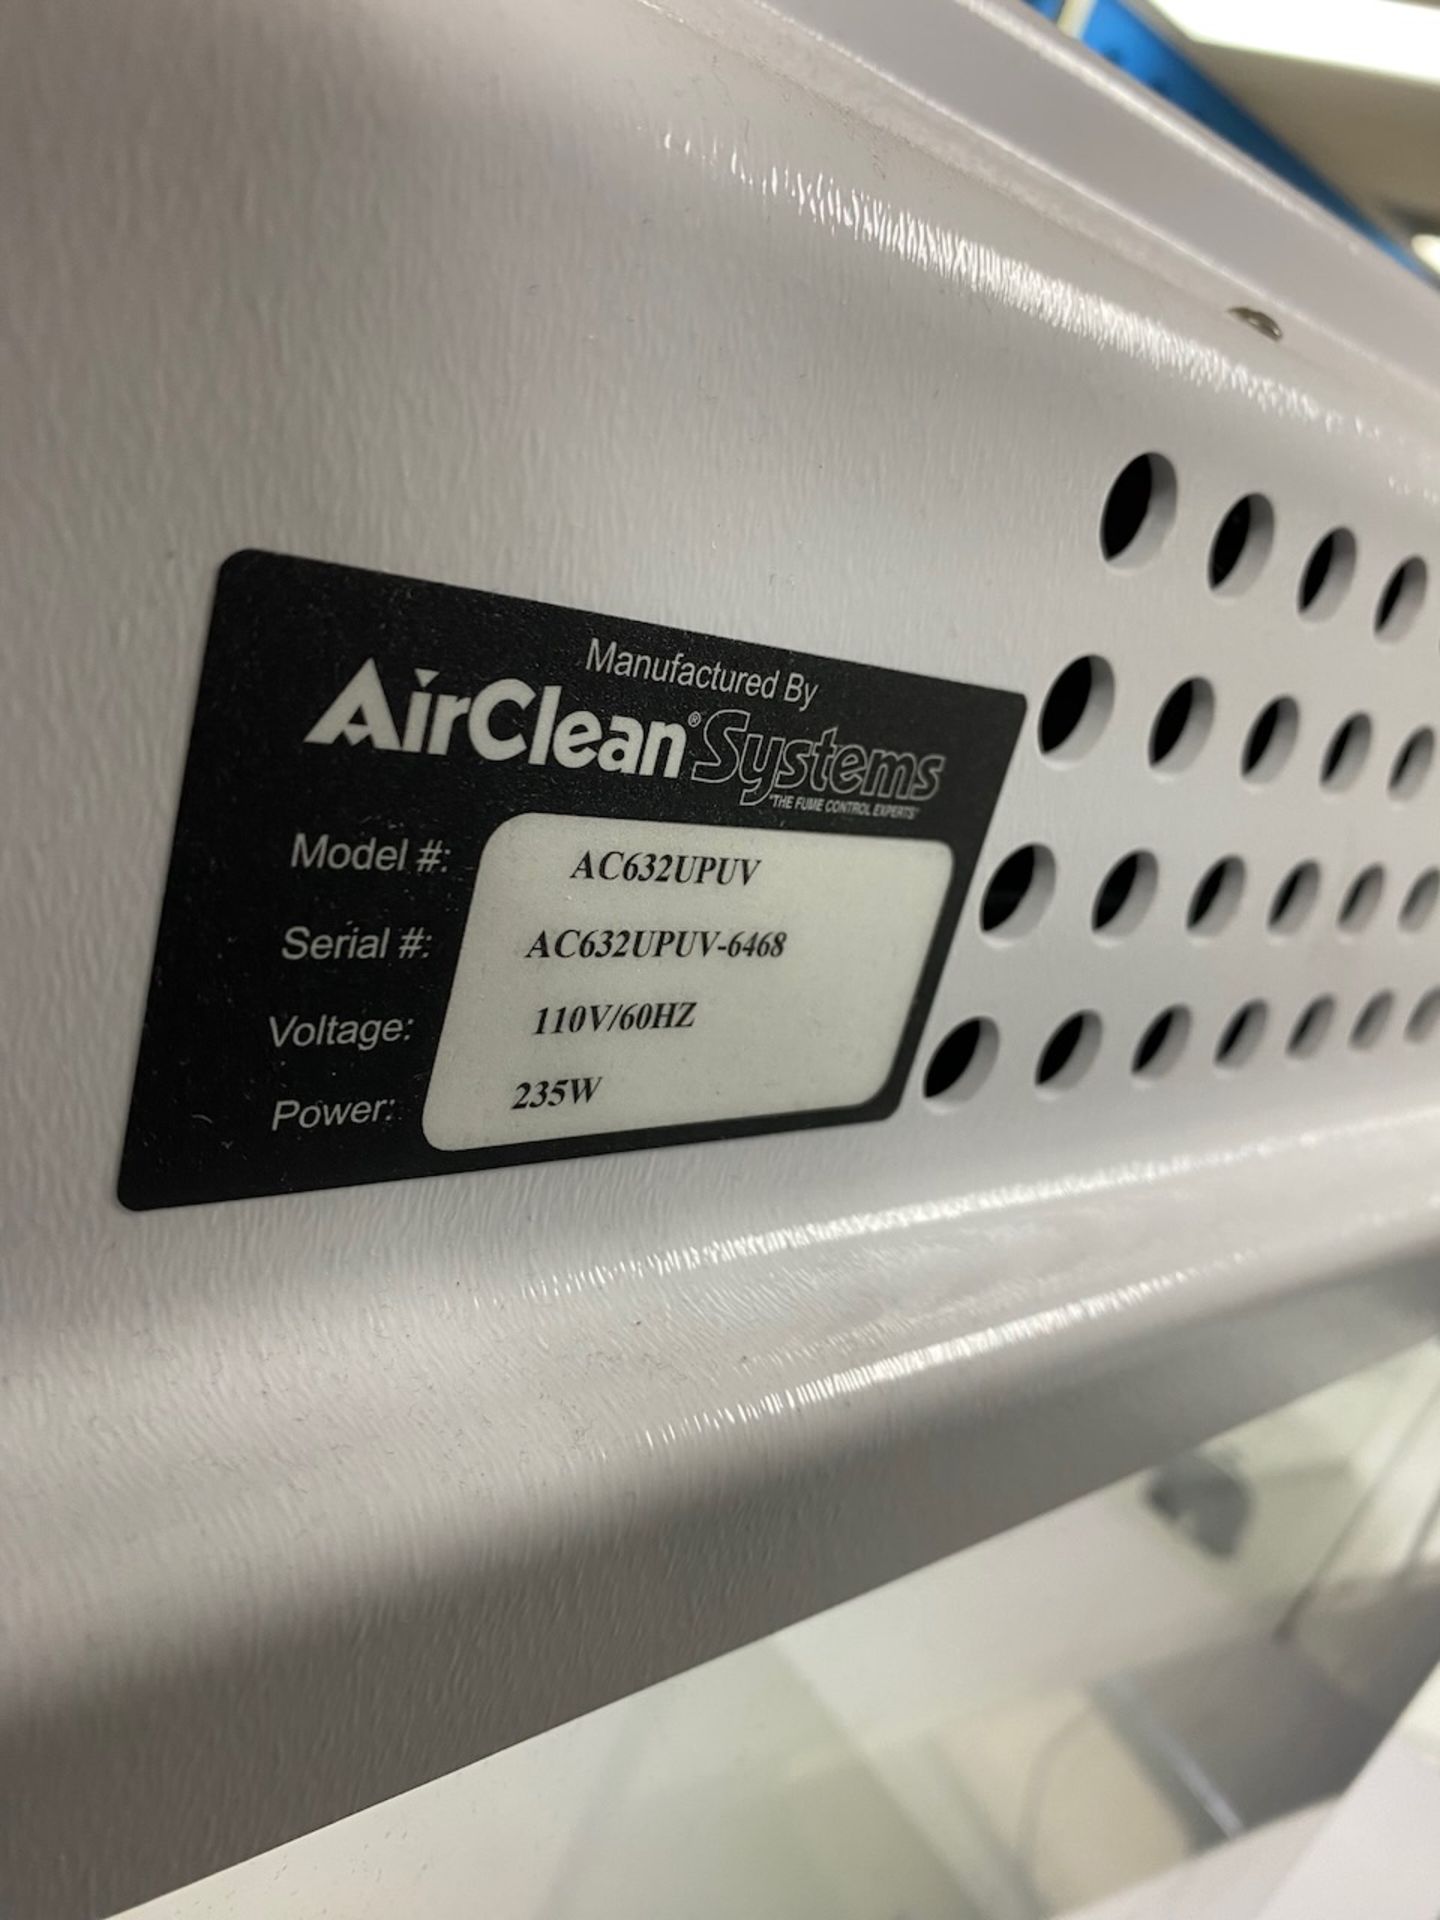 Airclean 600 Workstation - Image 4 of 4